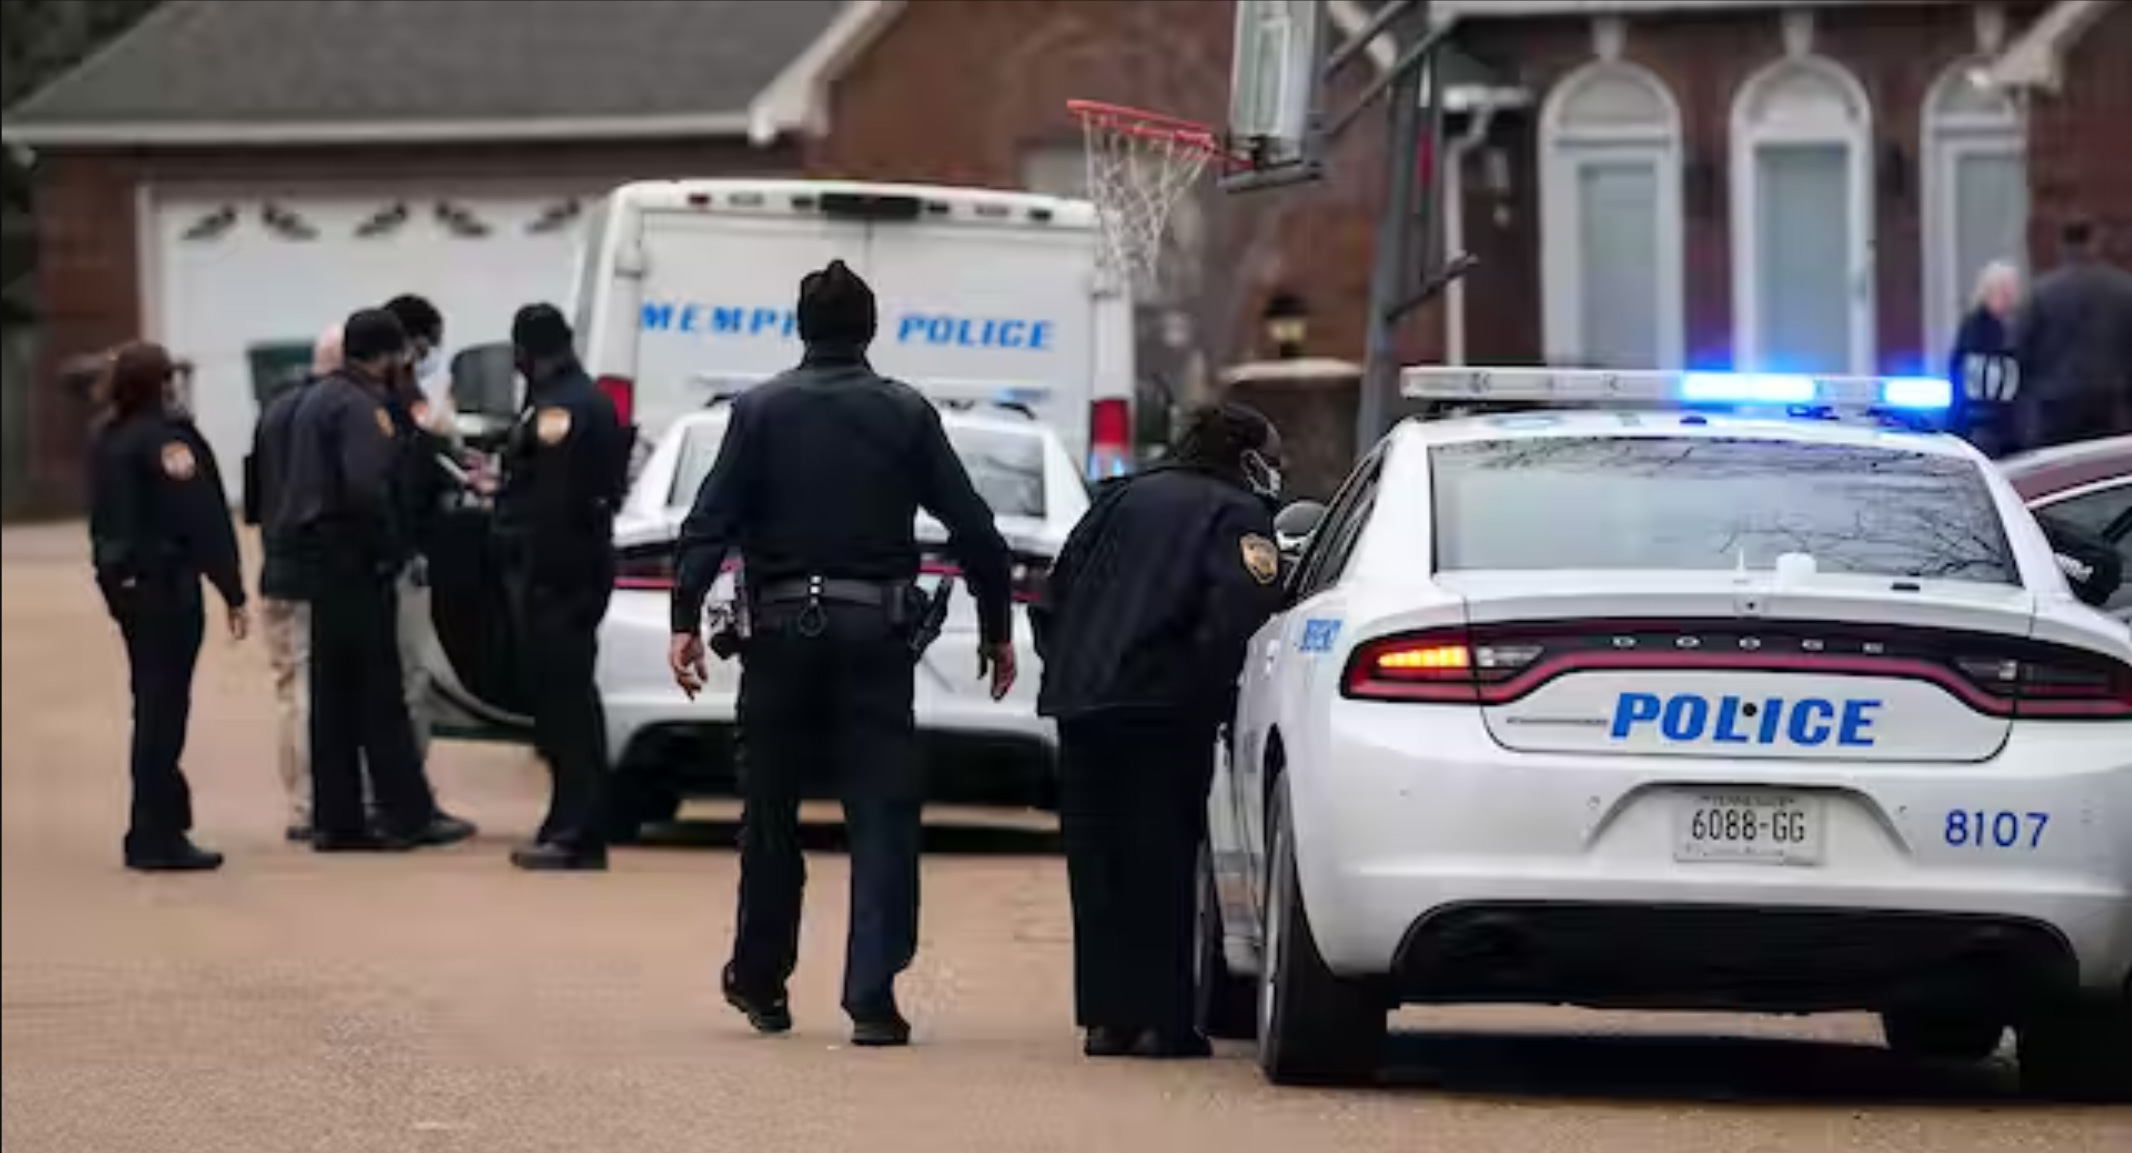 Several Memphis police officers stand next to police vehicles